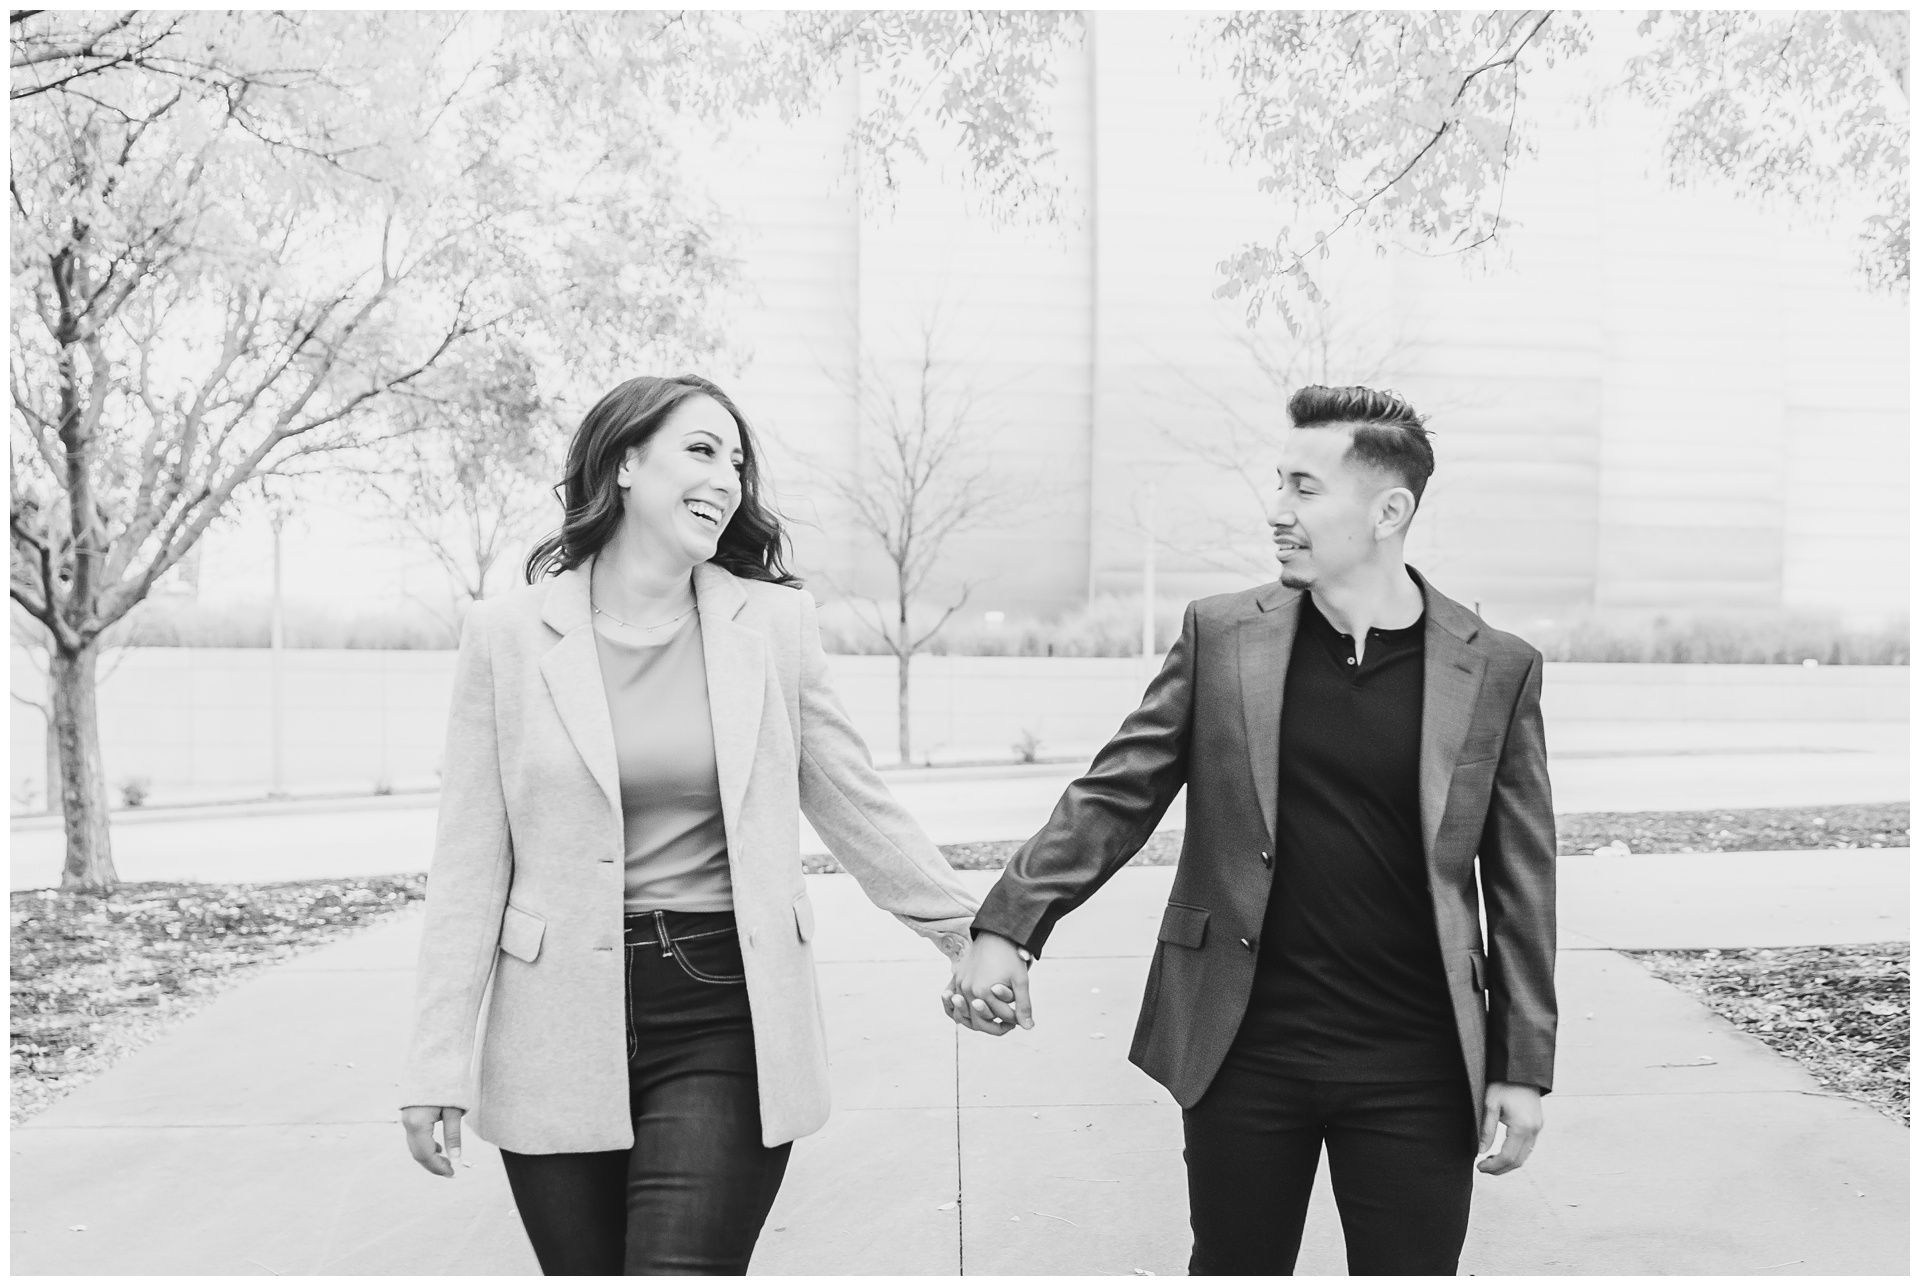 Engagement photography at Kauffman Center for the Performing Arts by Kansas City wedding photographers Wisdom-Watson Weddings.